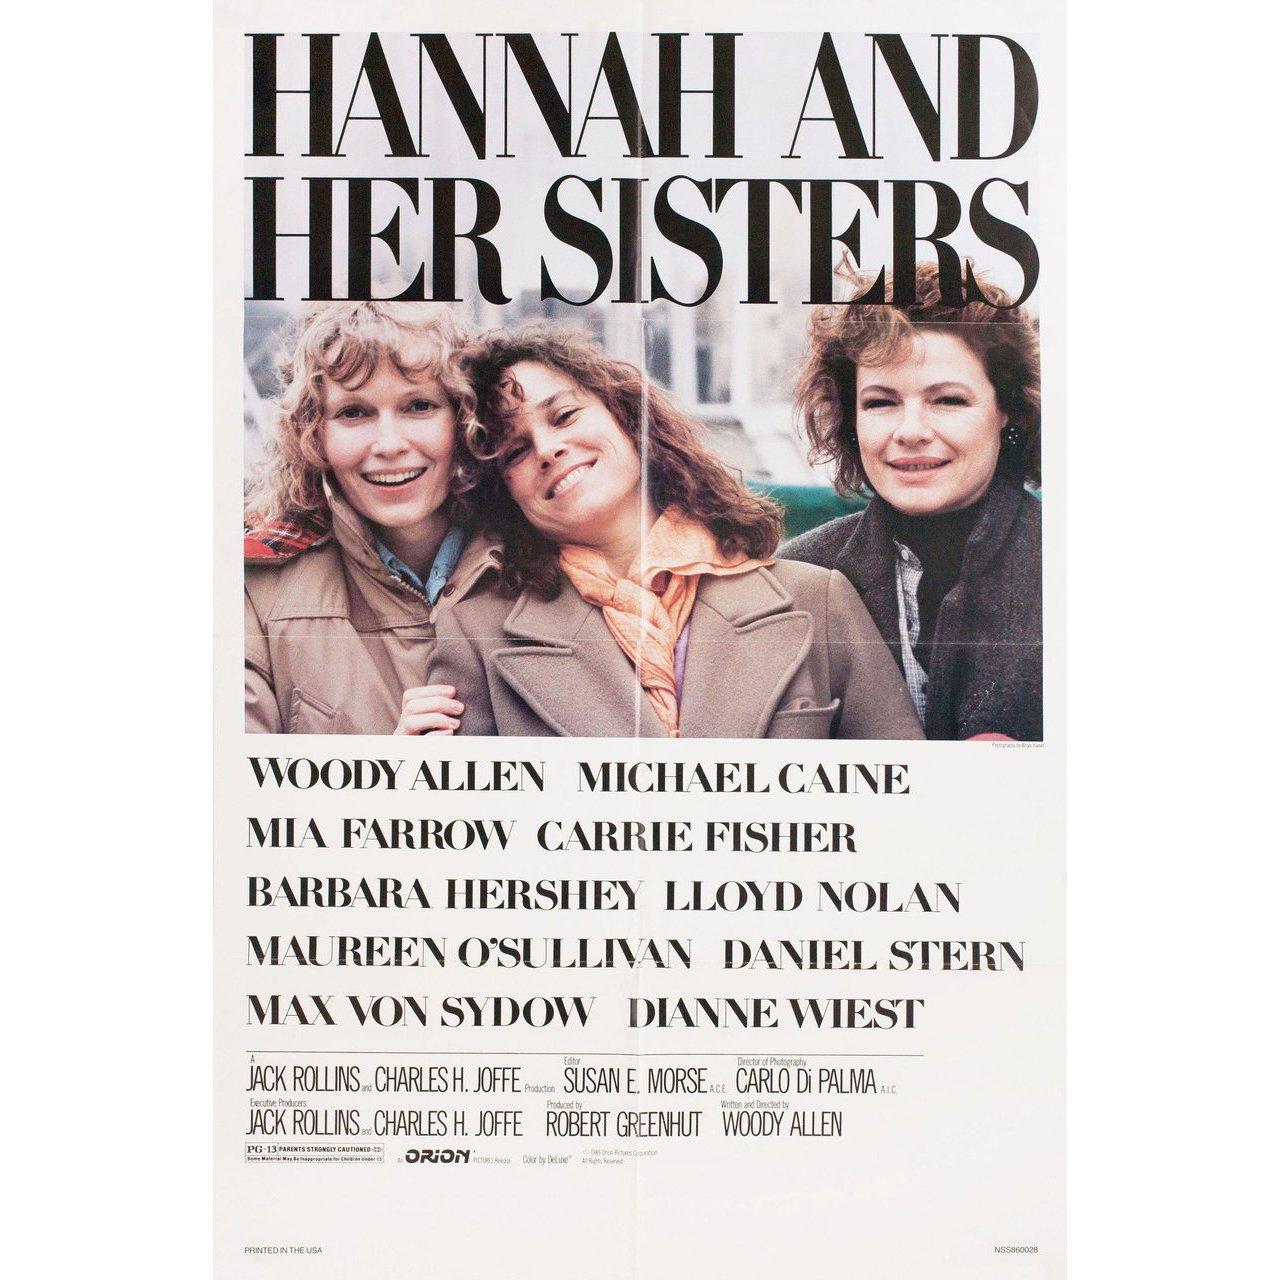 Original 1986 U.S. one sheet poster for the film Hannah and Her Sisters directed by Woody Allen with Barbara Hershey / Carrie Fisher / Michael Caine / Mia Farrow. Fine condition, folded. Many original posters were issued folded or were subsequently